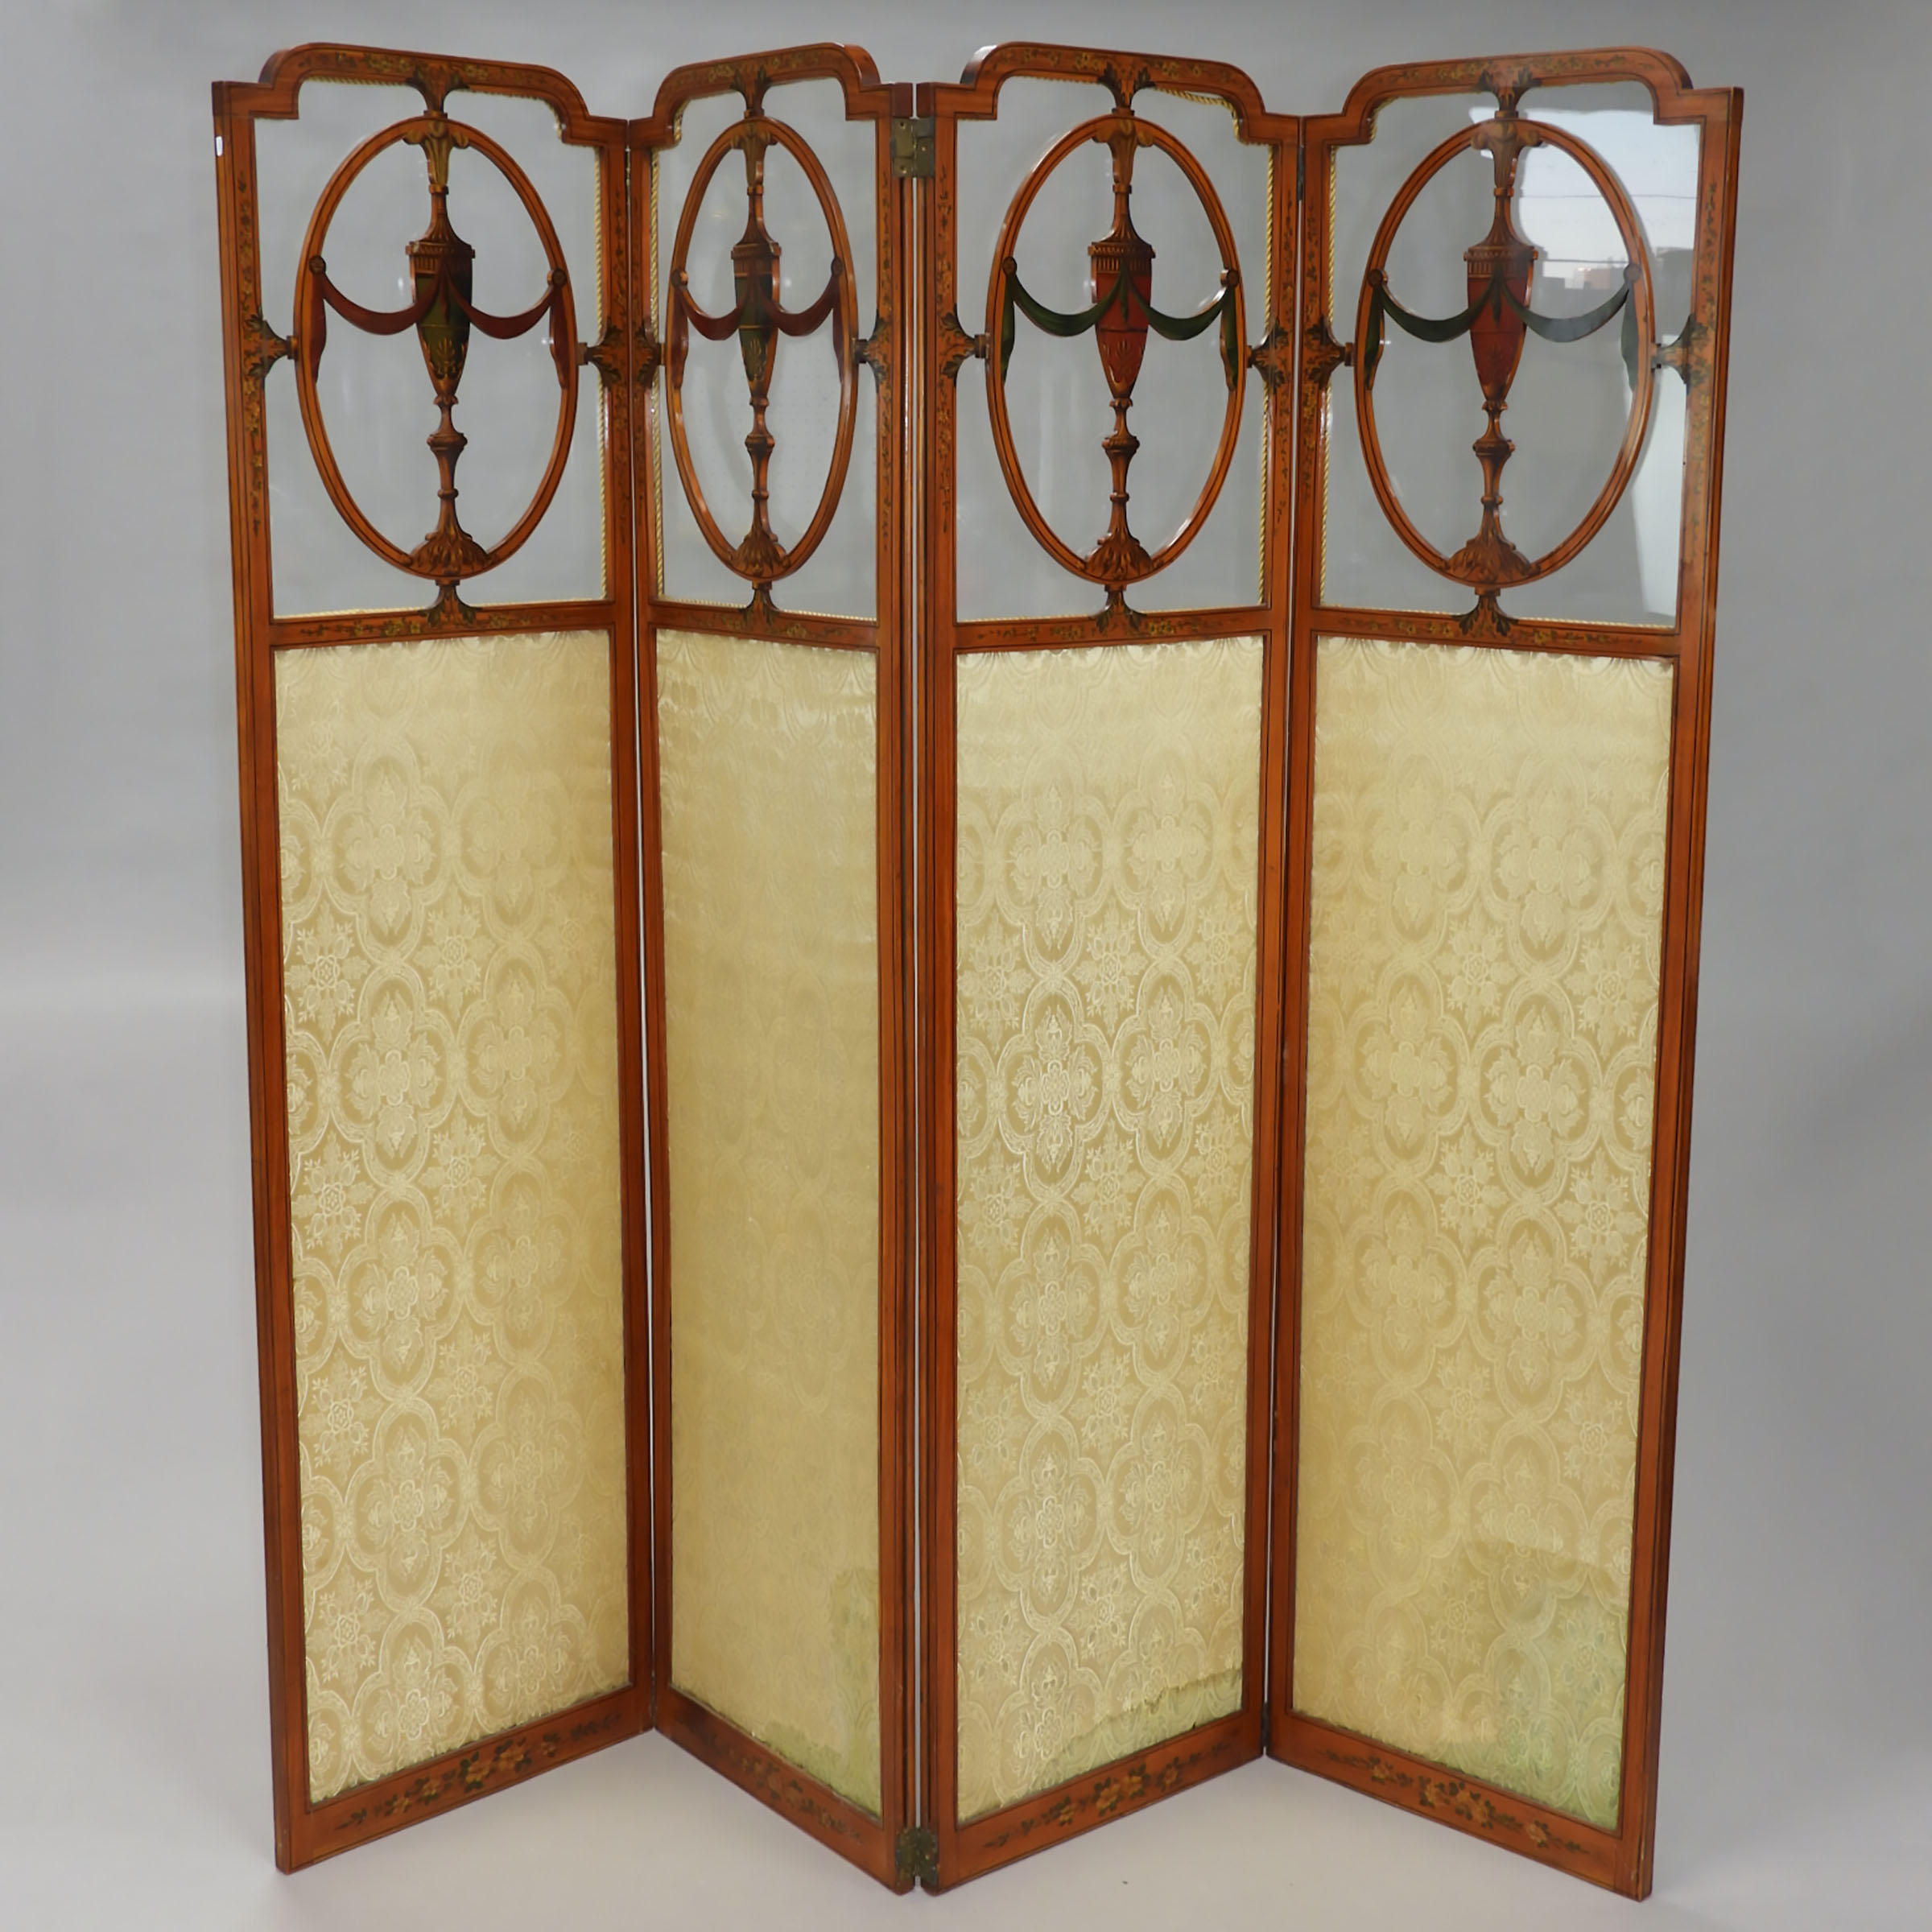 Neoclassical Painted Satinwood Four Panel Folding Screen, c.1900